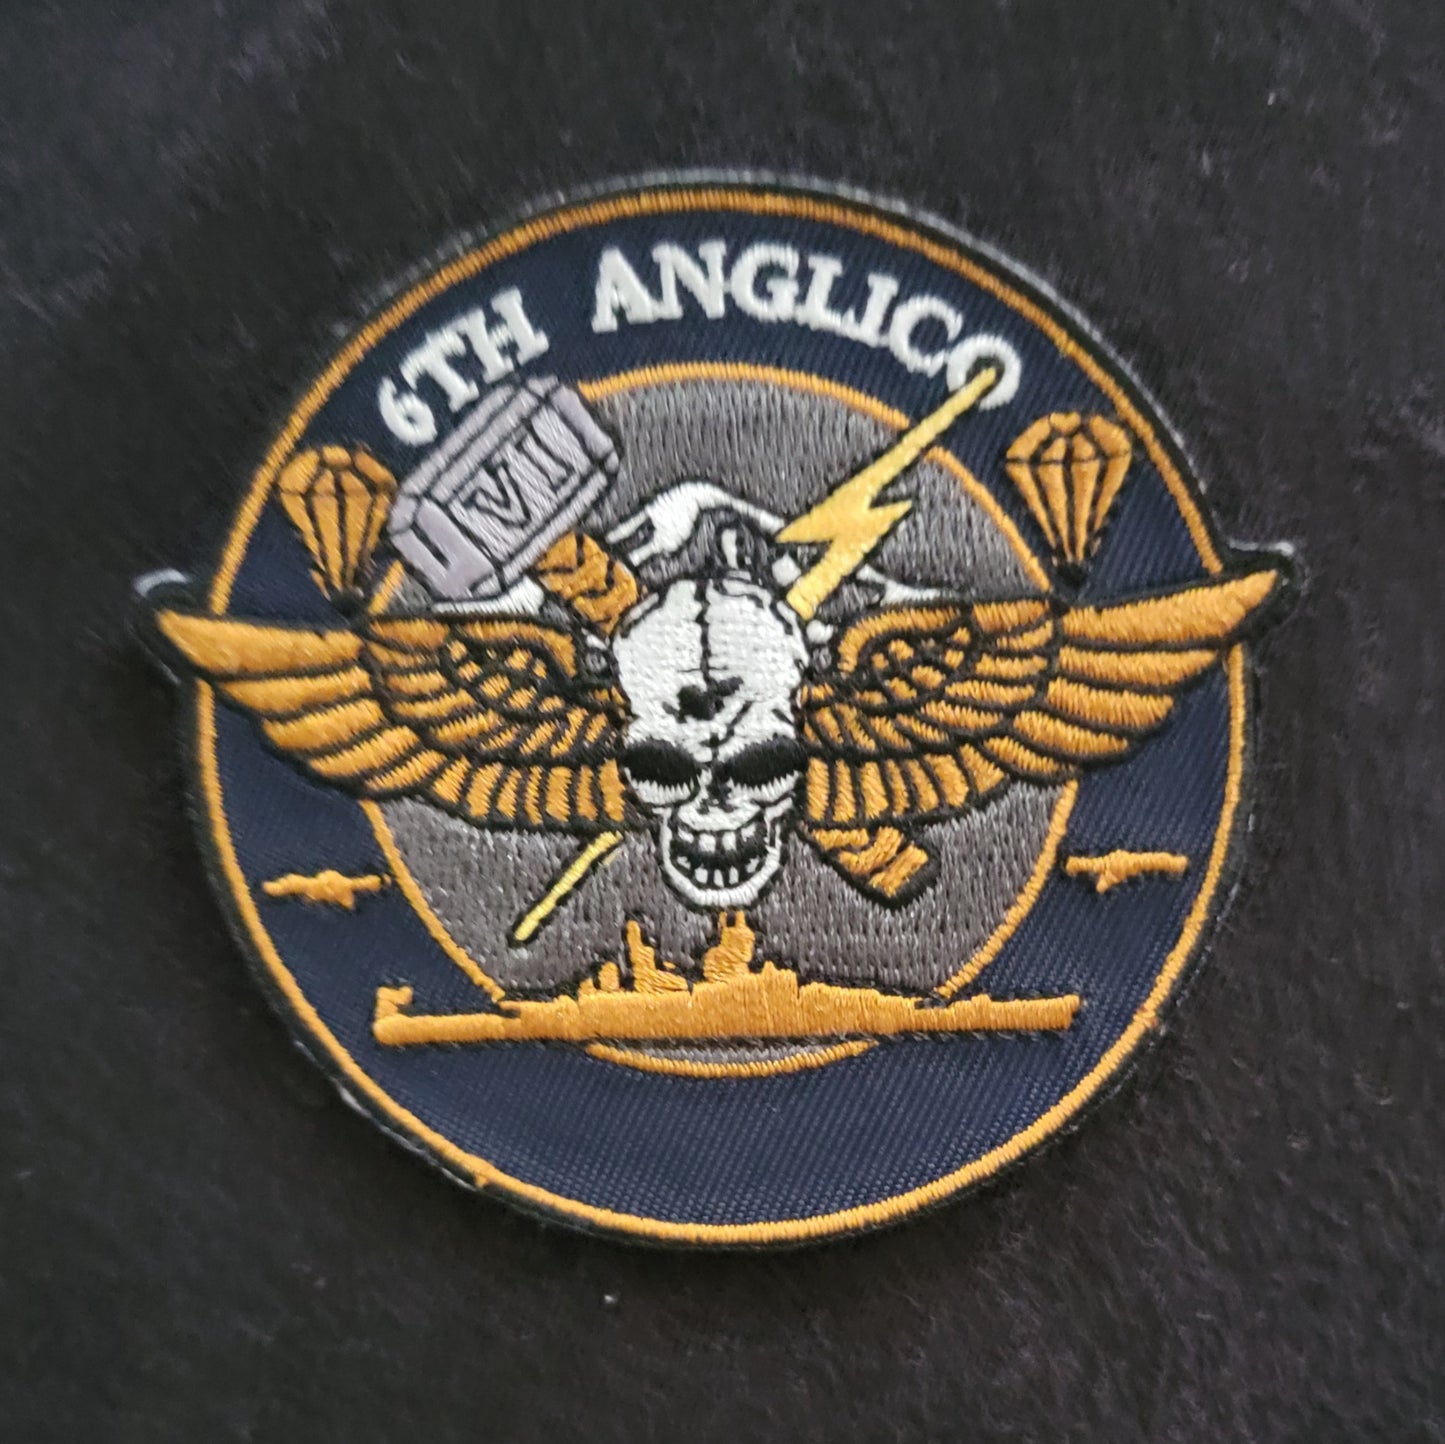 6th ANGLICO Patch